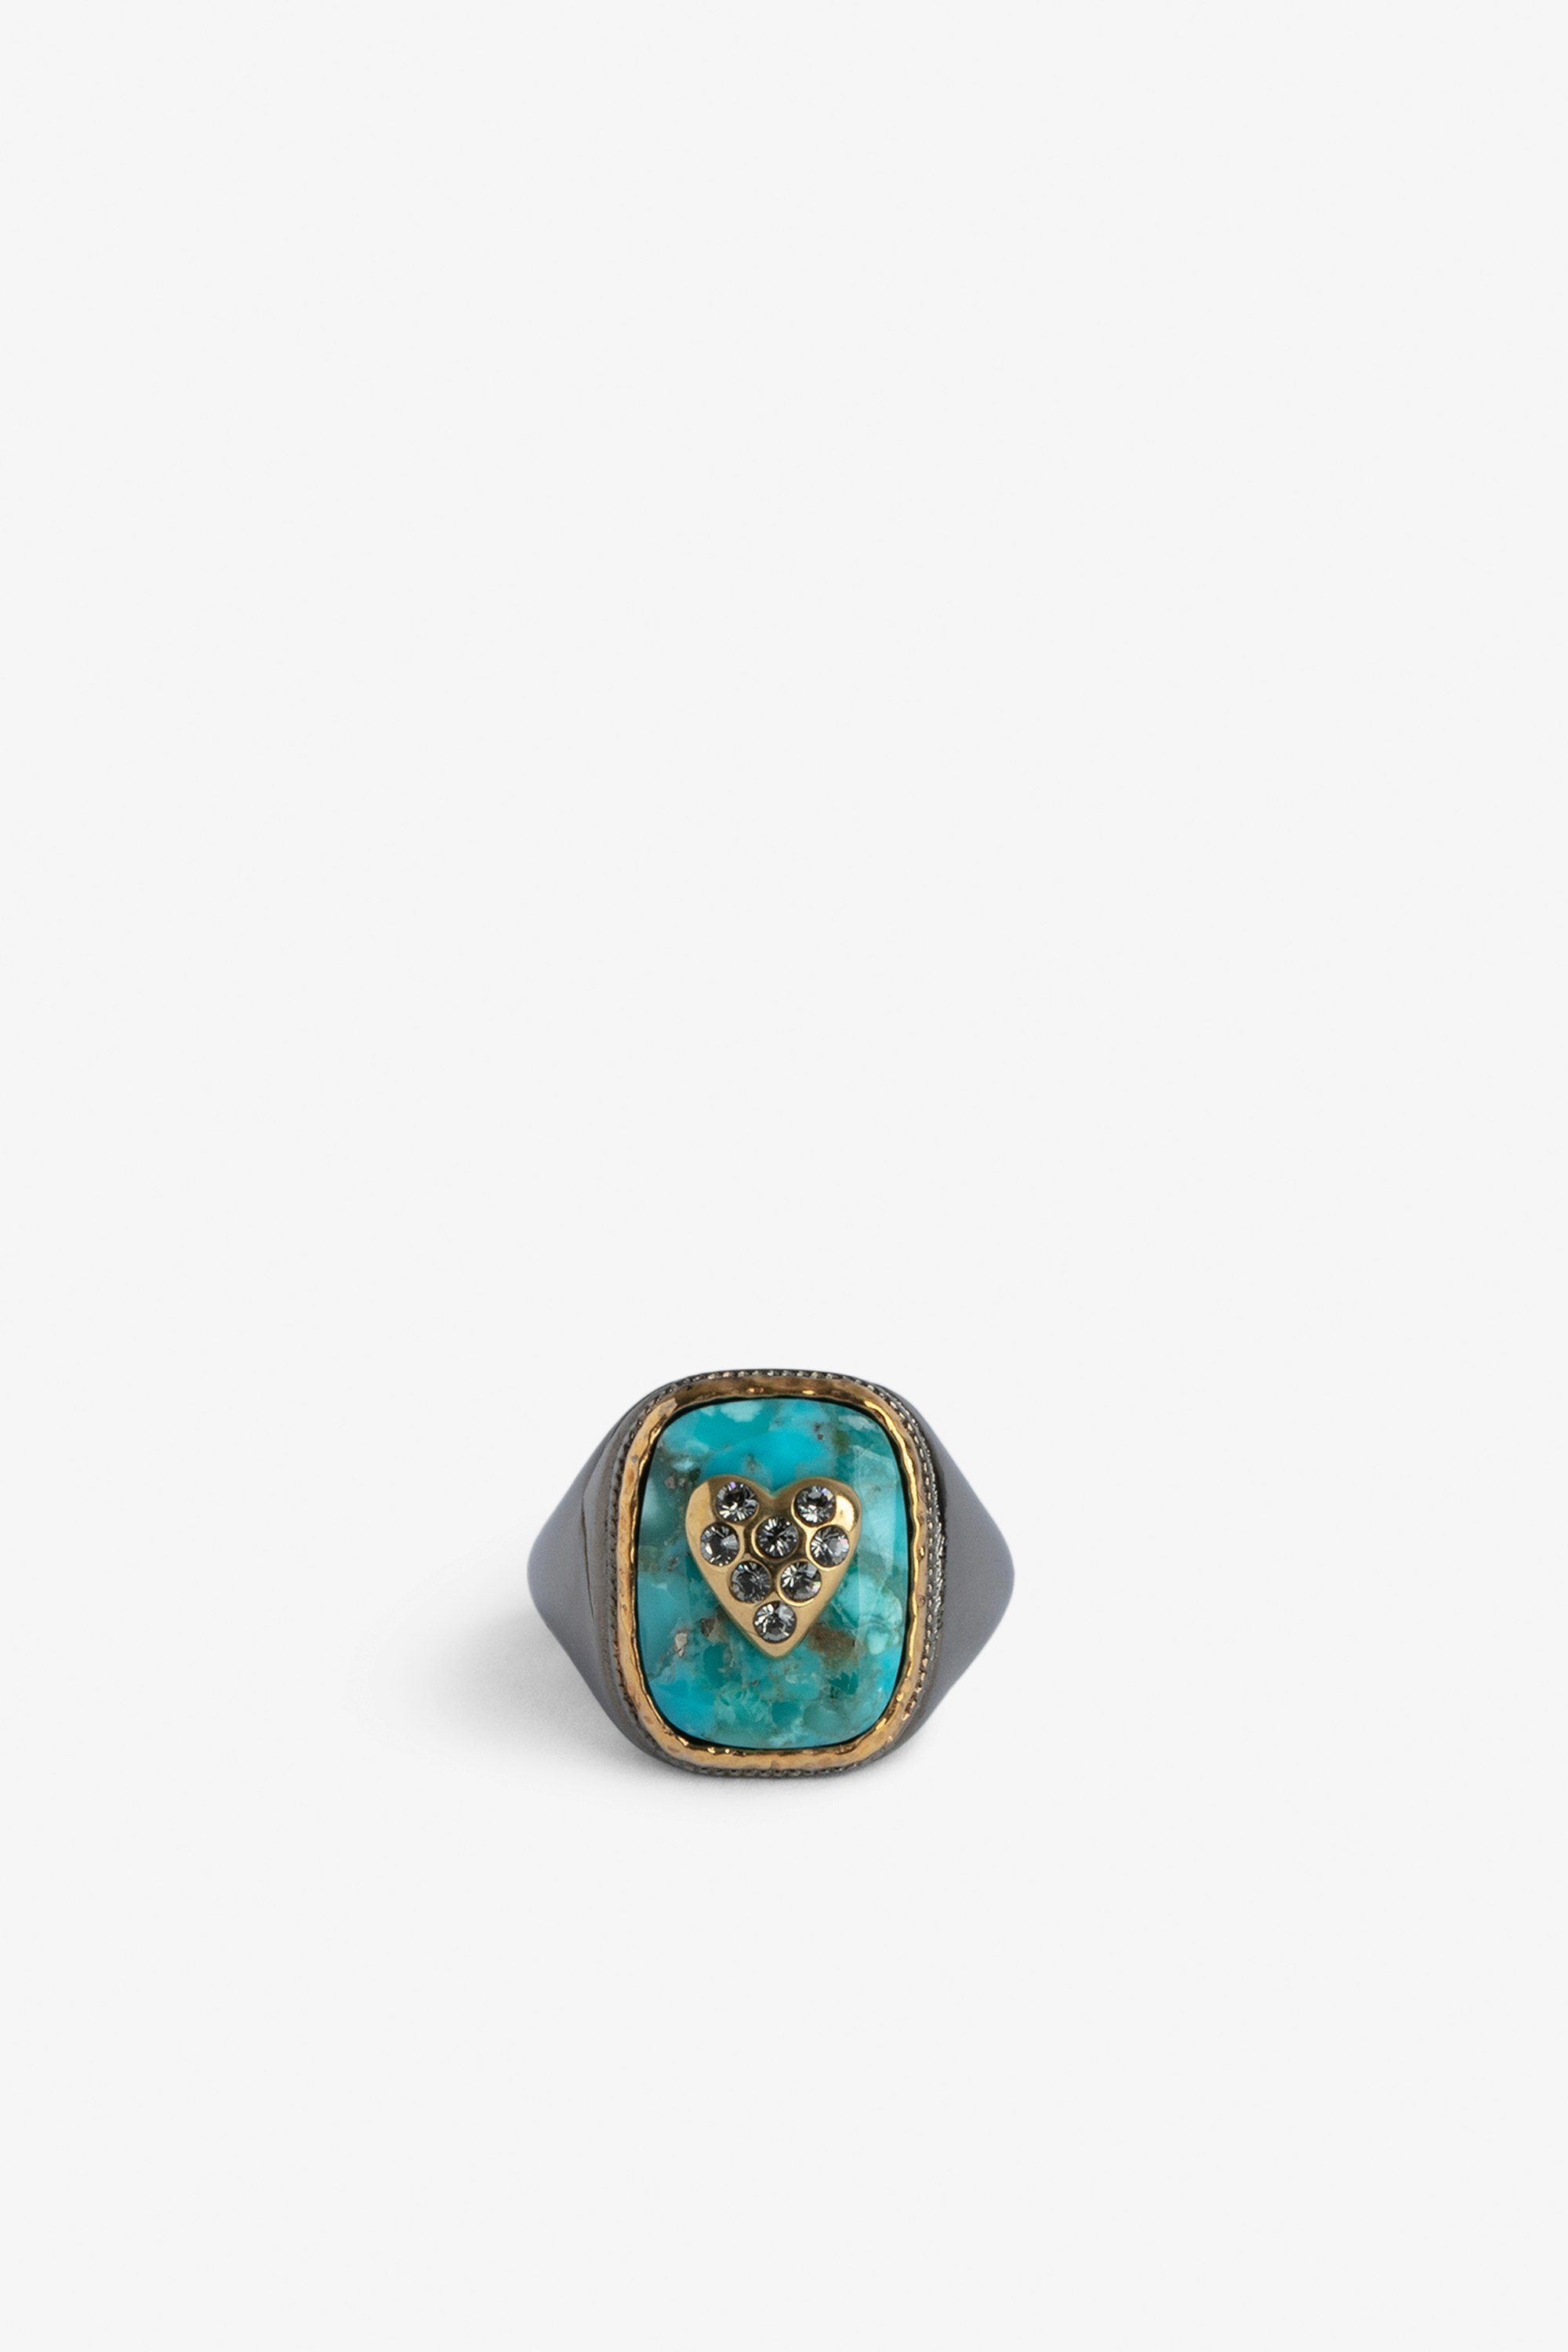 Heart signet ring Blue and gold-tone signet ring set with a gold-tone brass heart